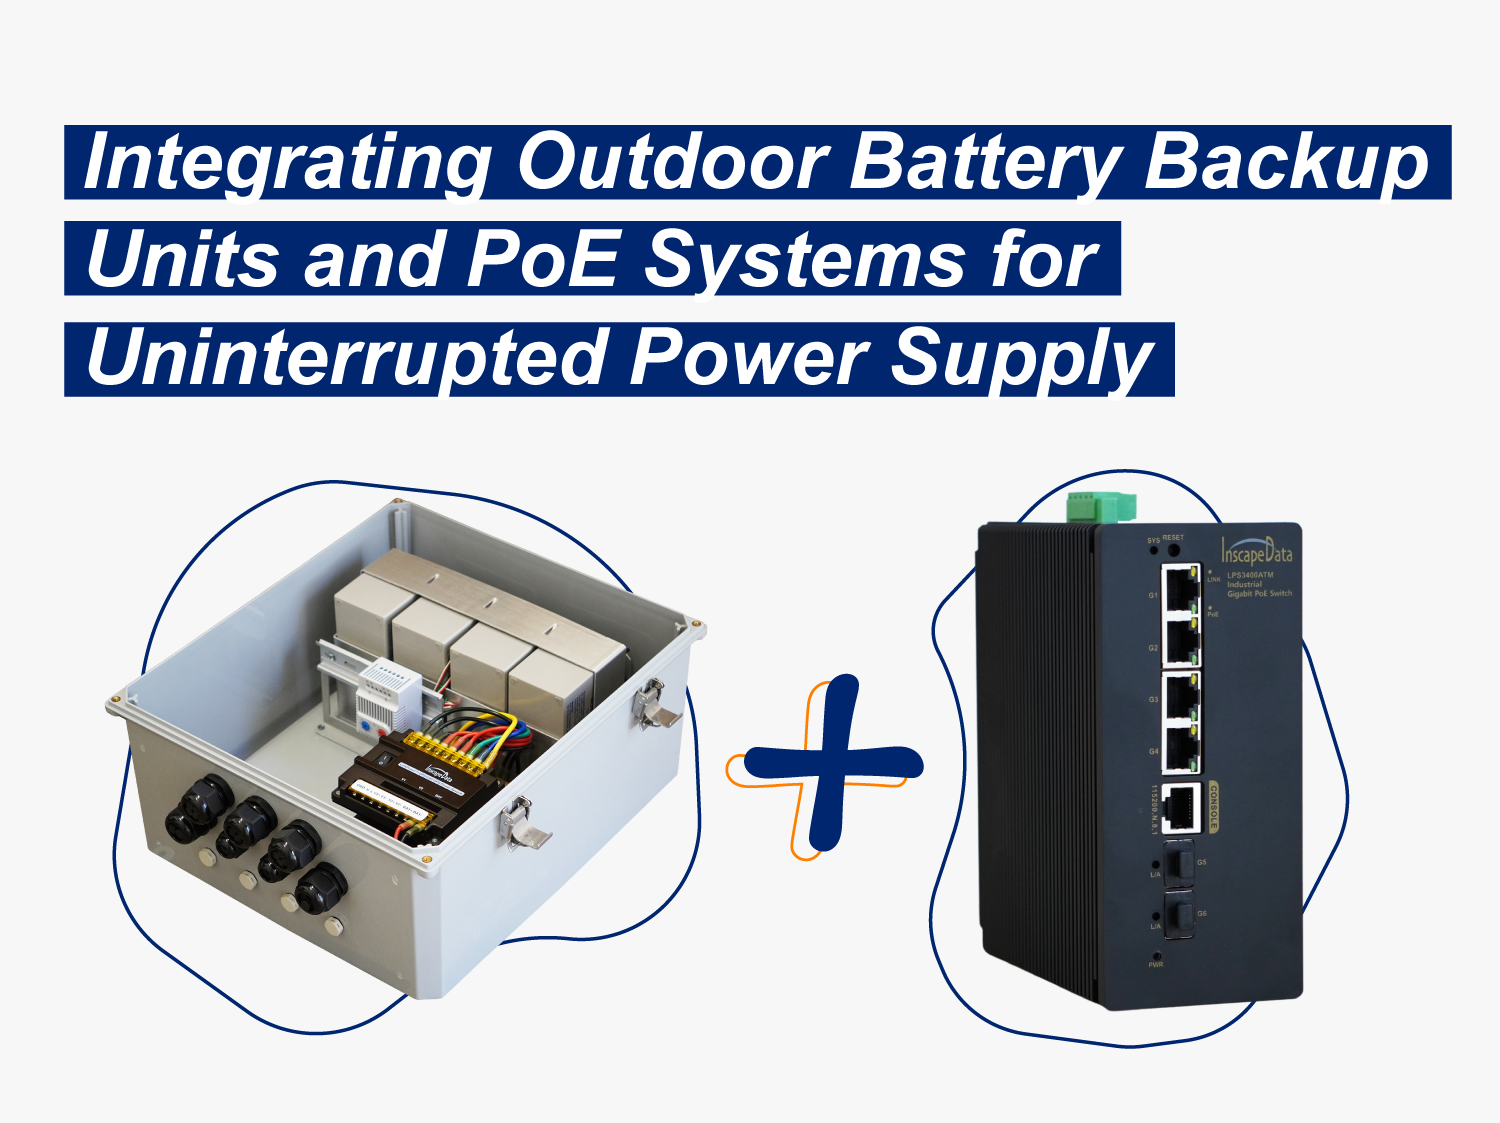 Integrating Outdoor Battery Backup Units and PoE Systems for Uninterrupted Power Supply